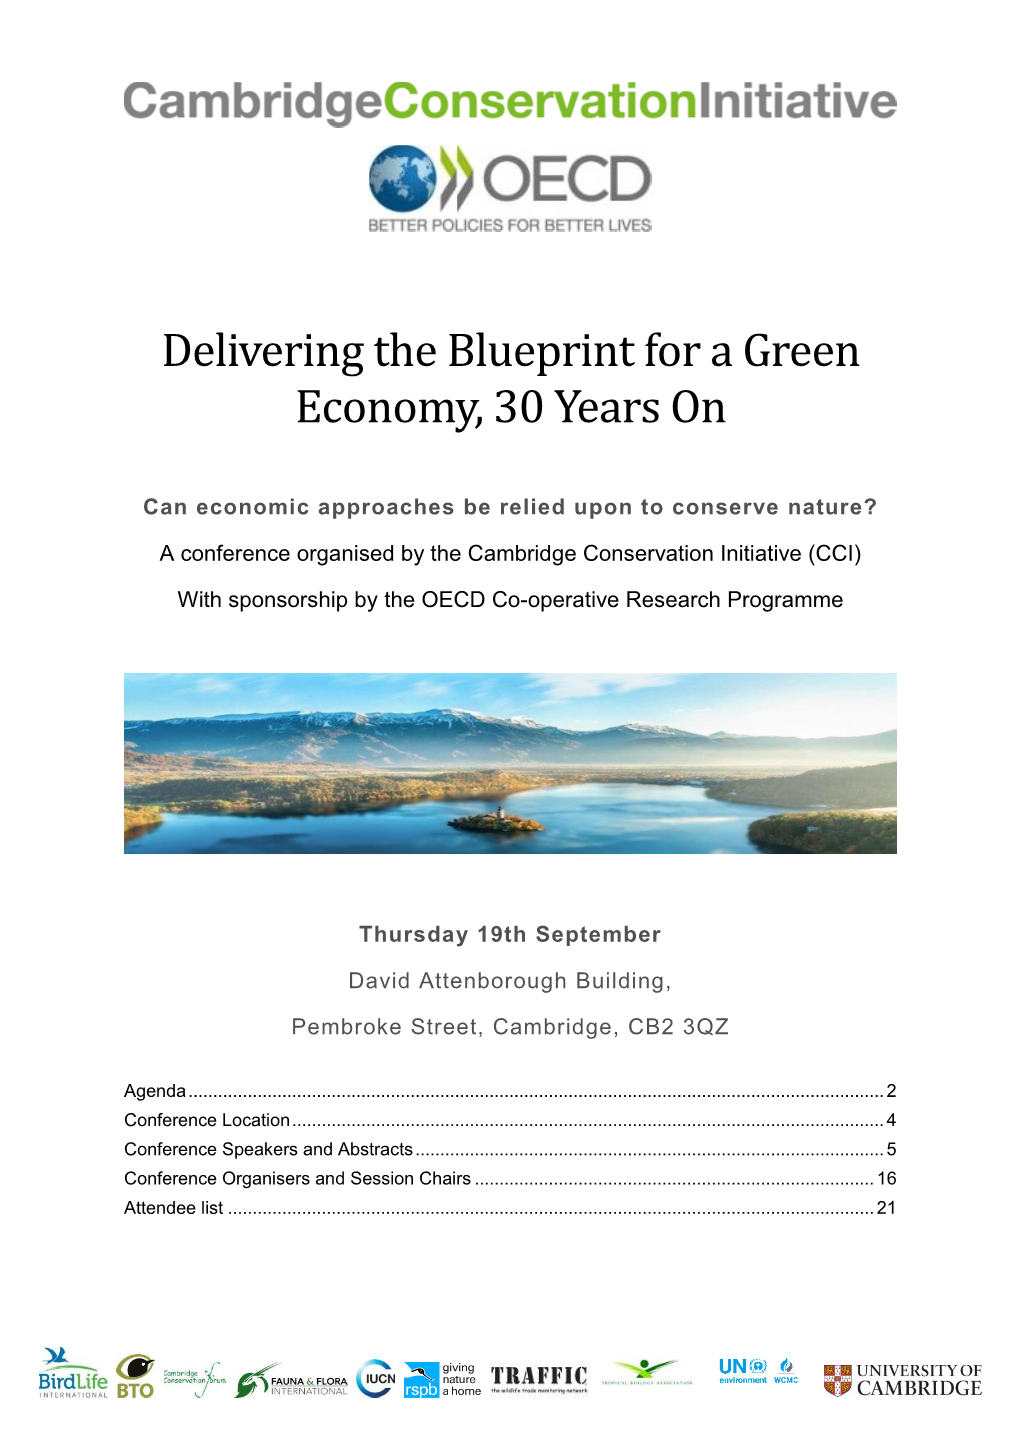 Delivering the Blueprint for a Green Economy, 30 Years On